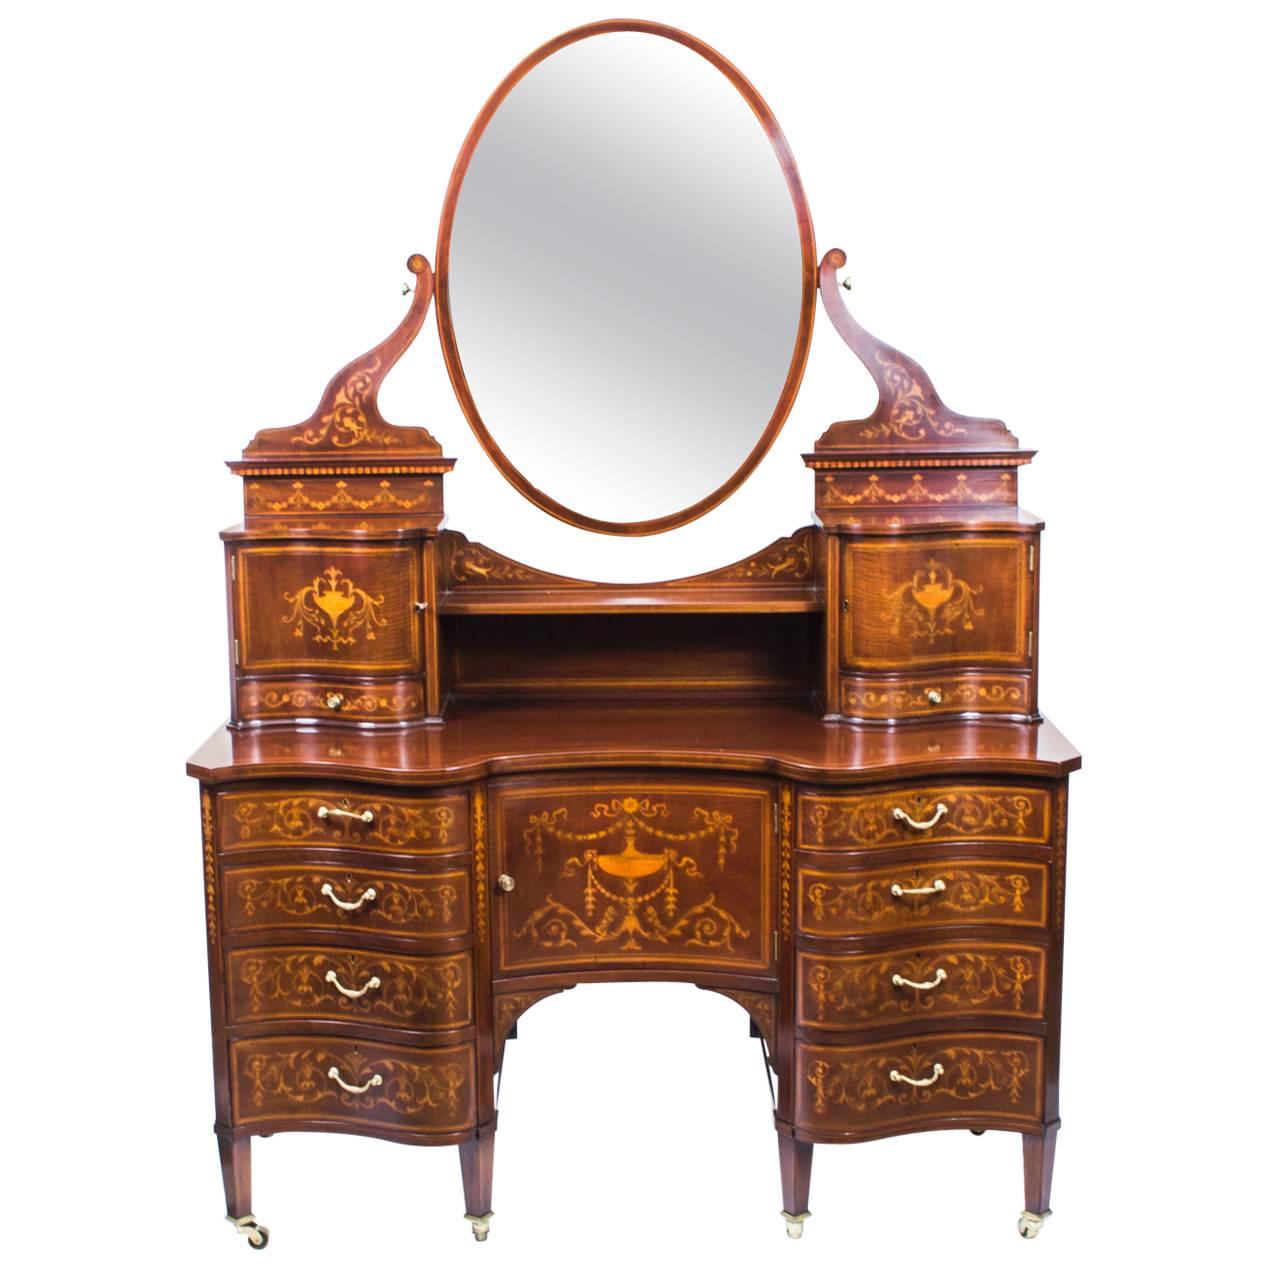 Antique Victorian Dressing Table Edwards & Roberts, circa 1880